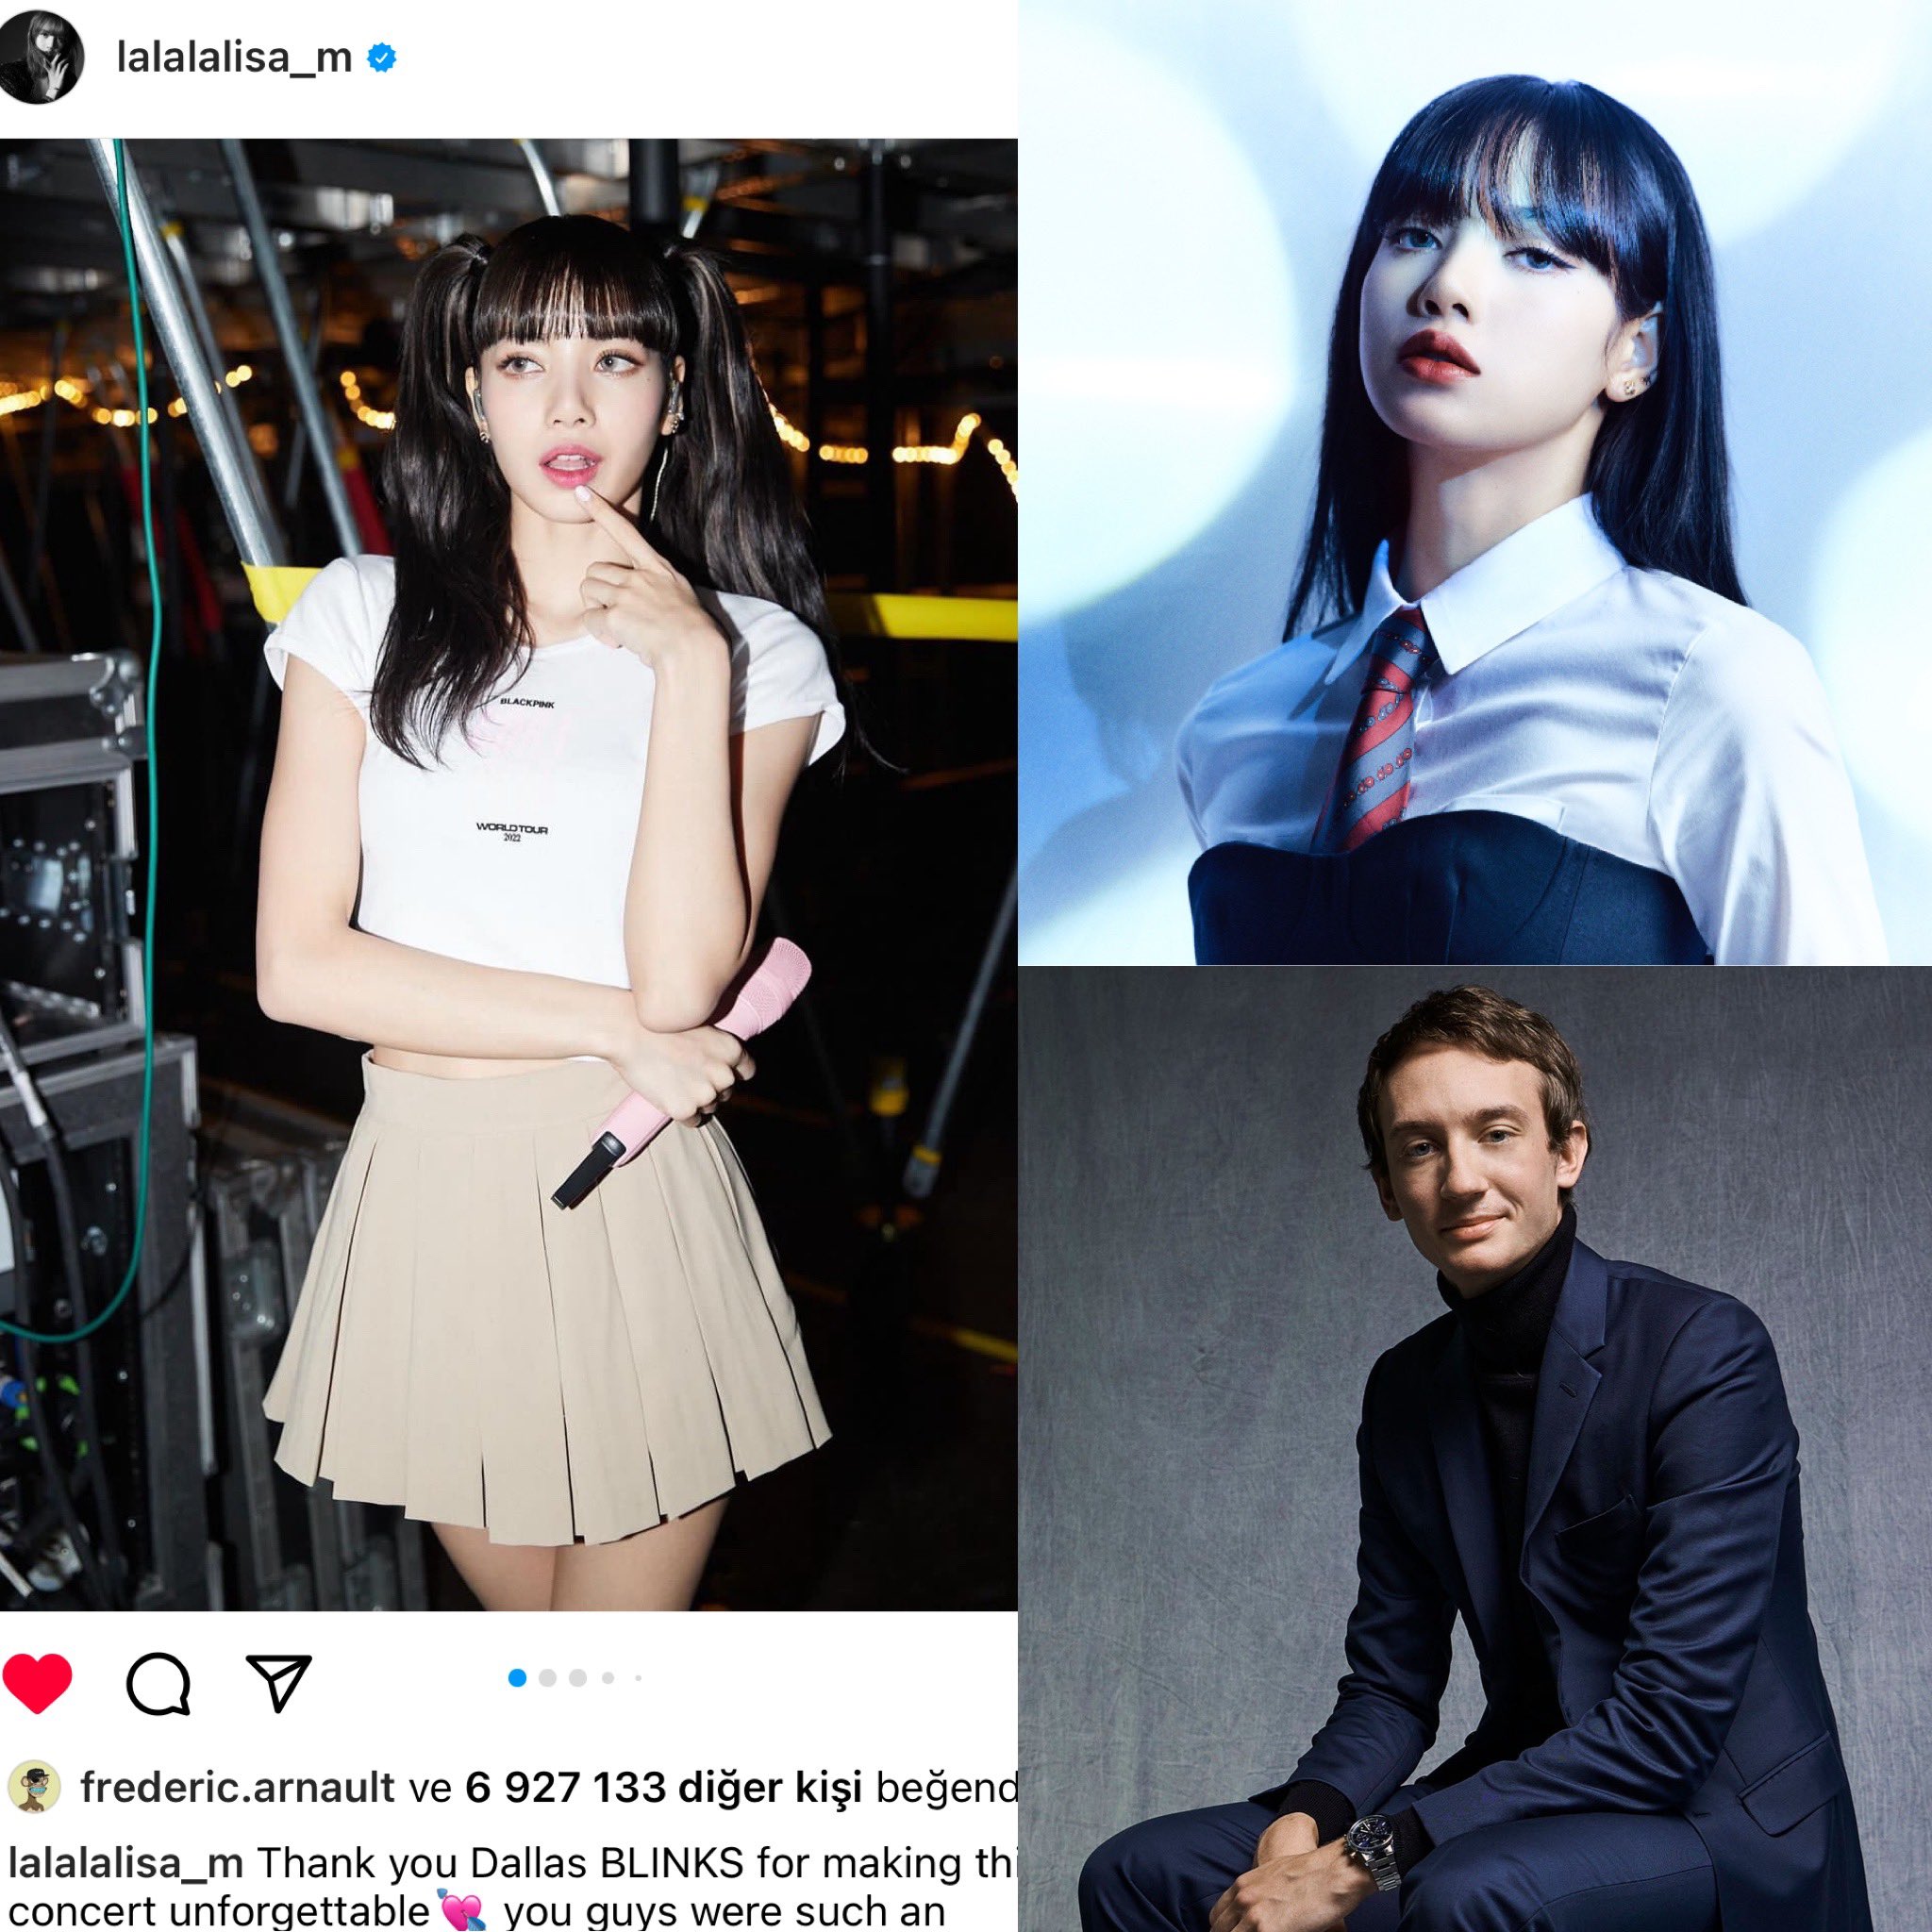 LALISA & LISA ONLY on X: LVMH heirs Frédéric Arnault (CEO of Tag Heuer)  and Alexandre Arnault (VP of product and communications at Tiffany&Co)  liked BVLGARI's post with LISA #LISAXBVLGARI  /